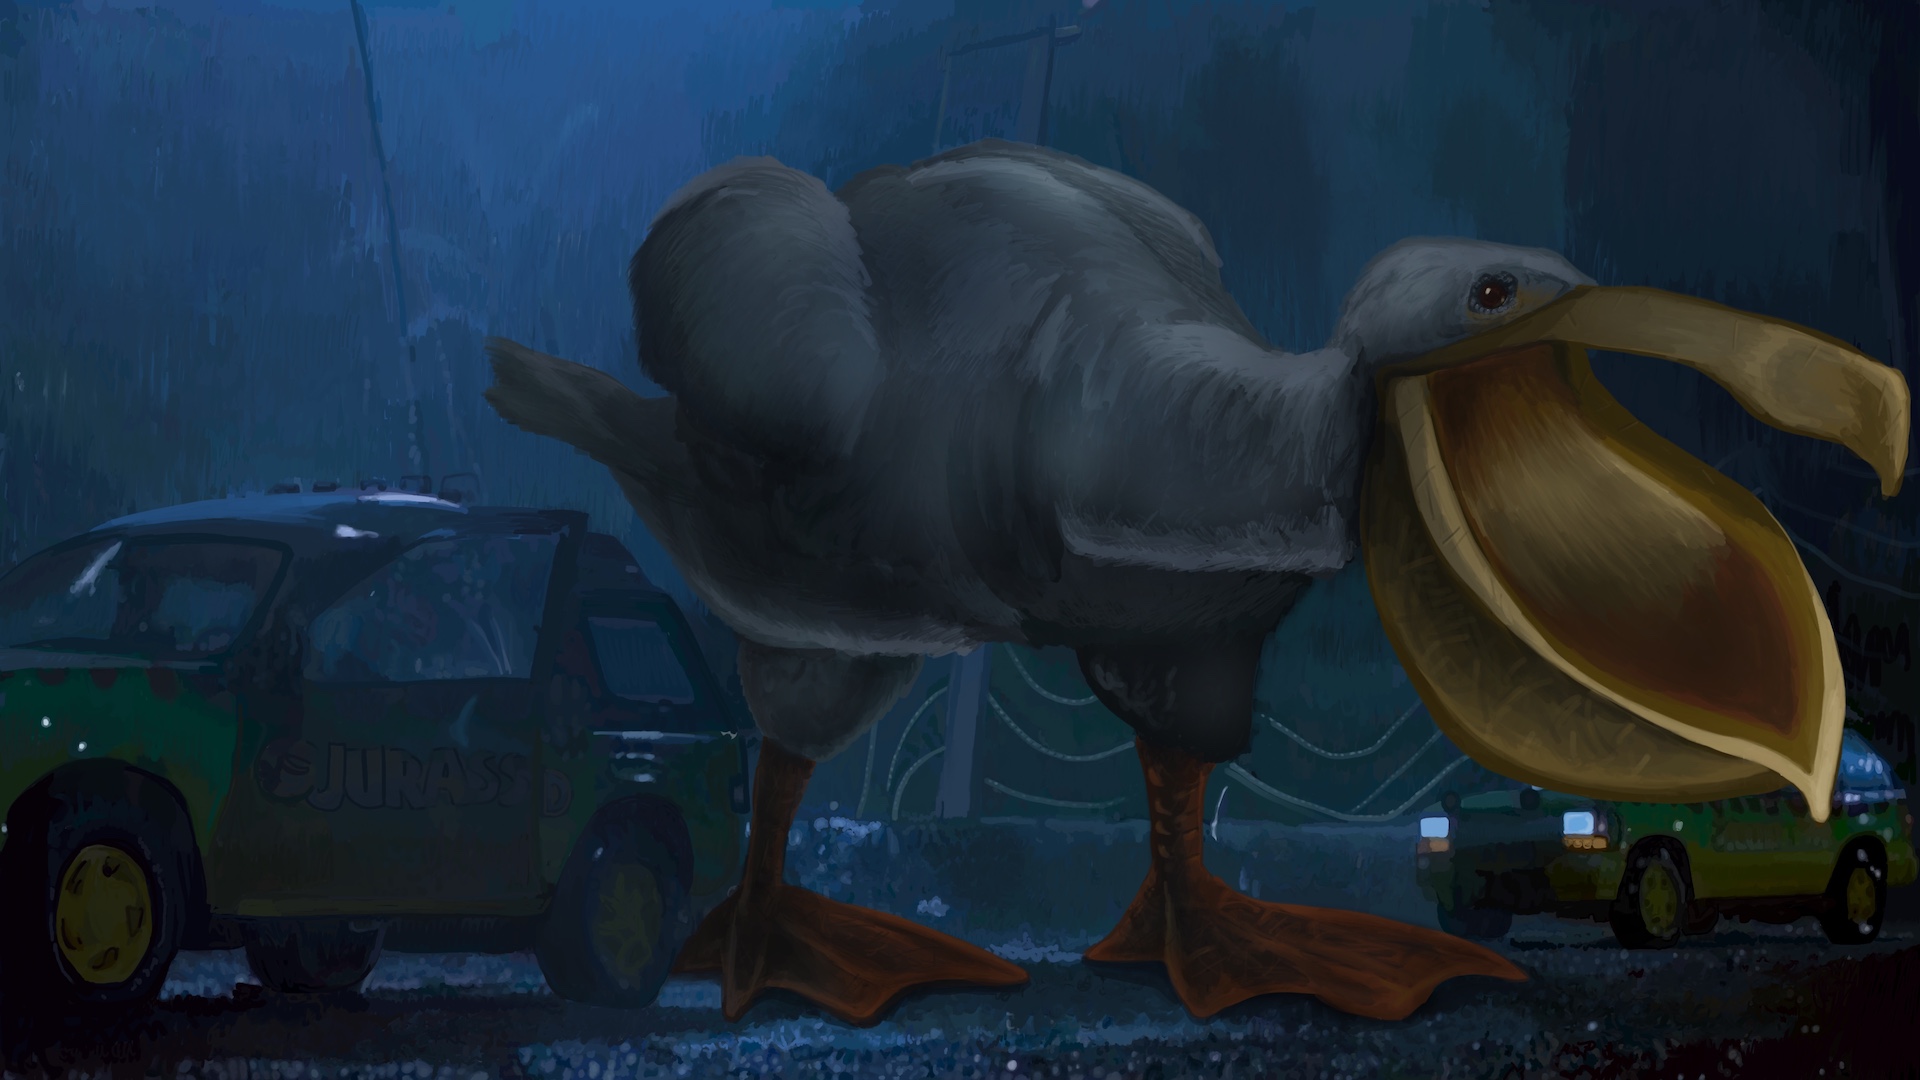 Digitally painted reproduction of of a frame from Jurassic Park, except instead of a T-Rex breaking out of the pen, it's a giant pelican.'